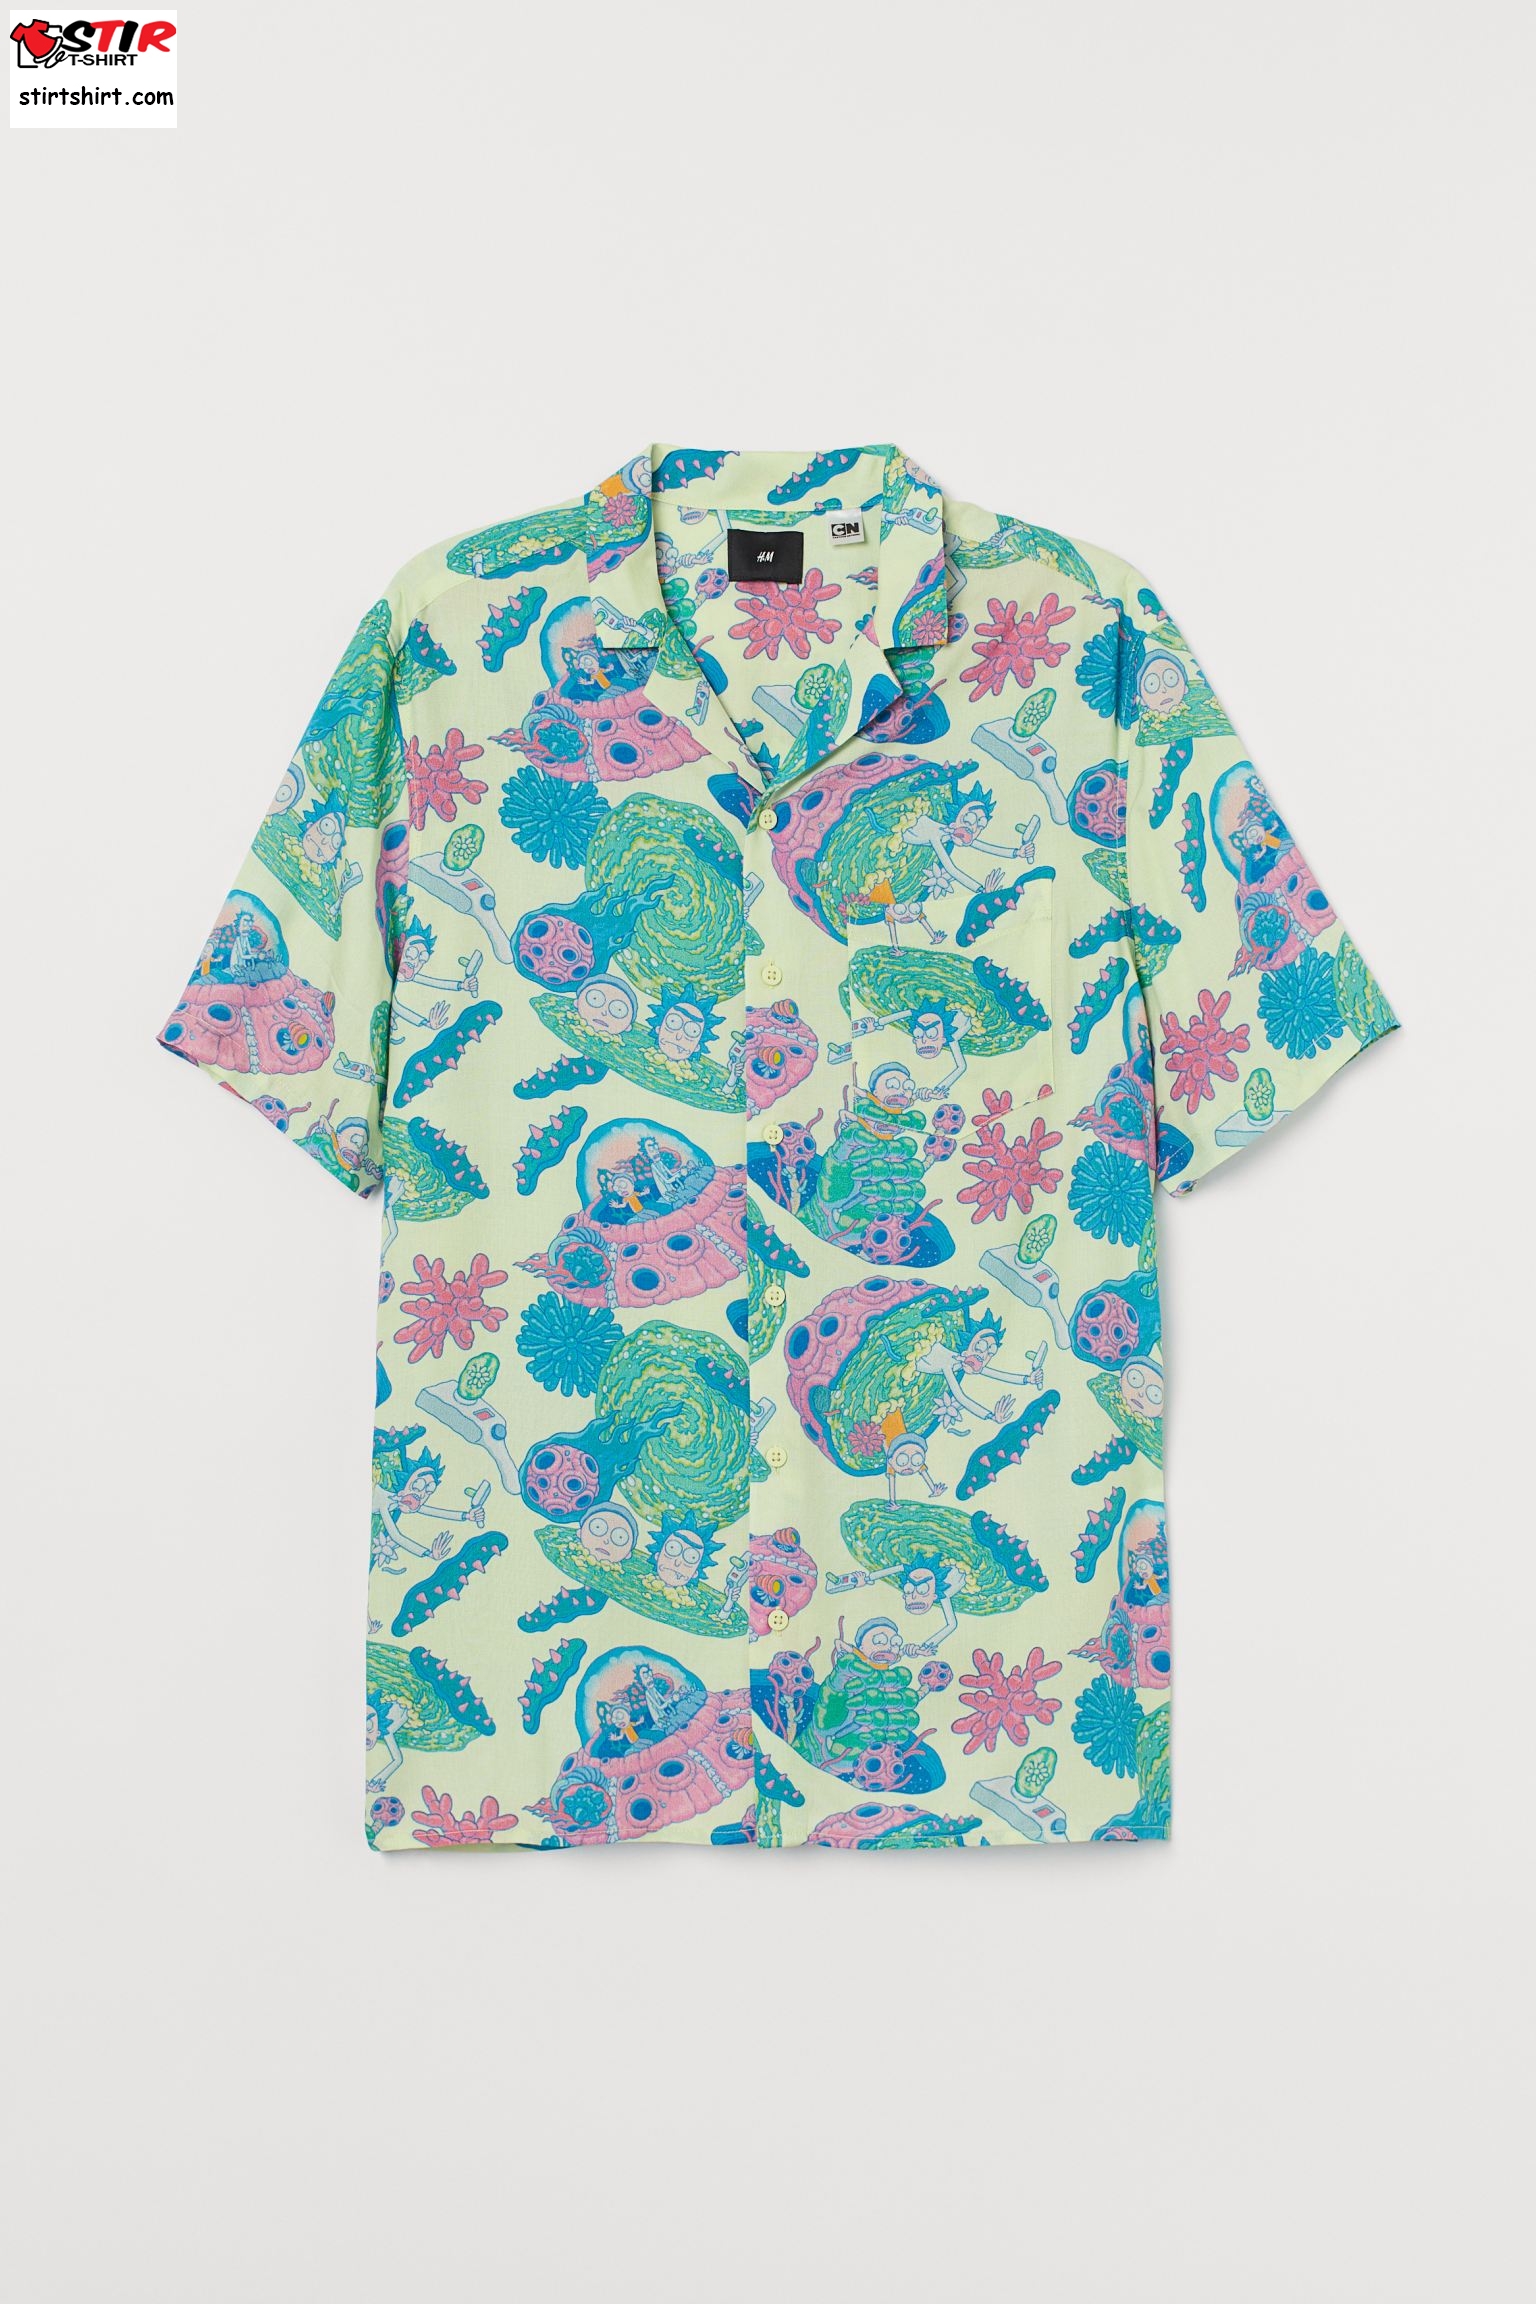 Patterned Resort Shirt1  Rick And Morty 